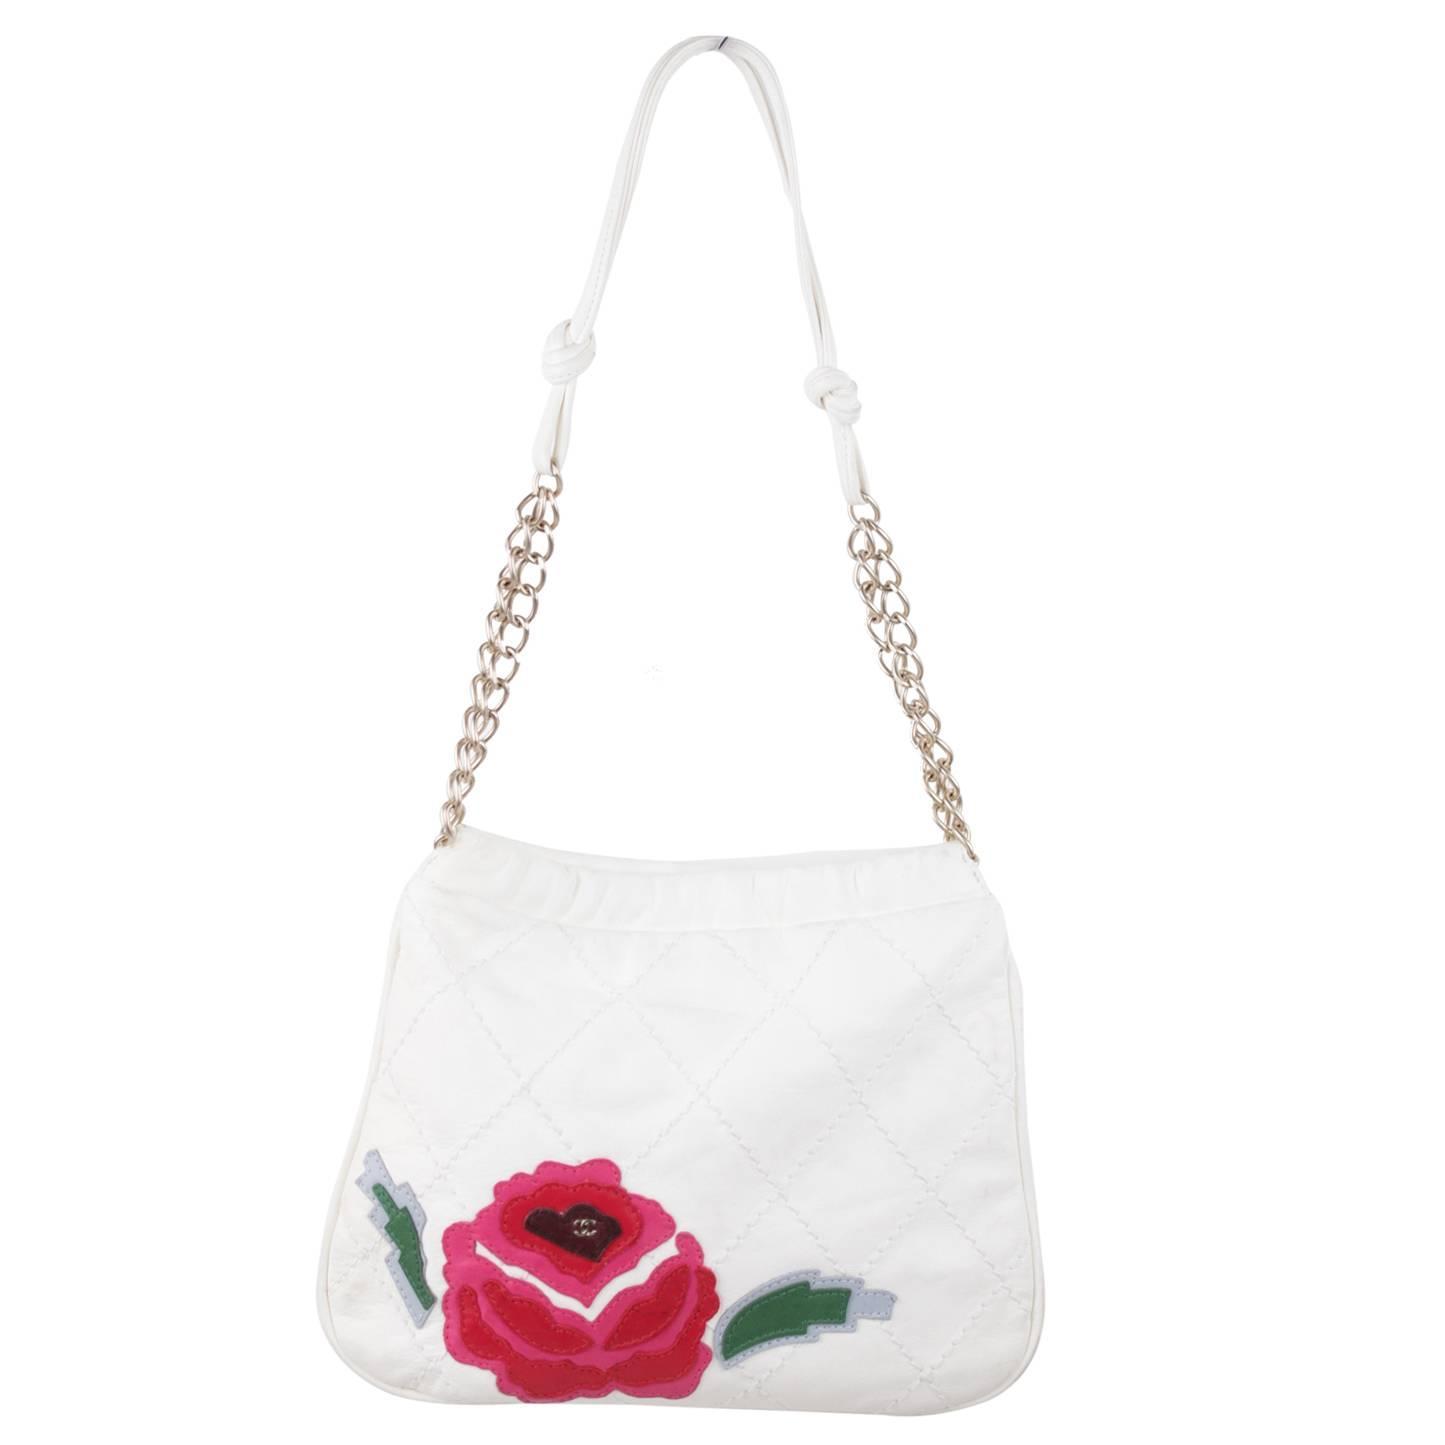 CHANEL White QUILTED Leather HANDBAG Purse TOTE w/ FLOWER Applique at ...